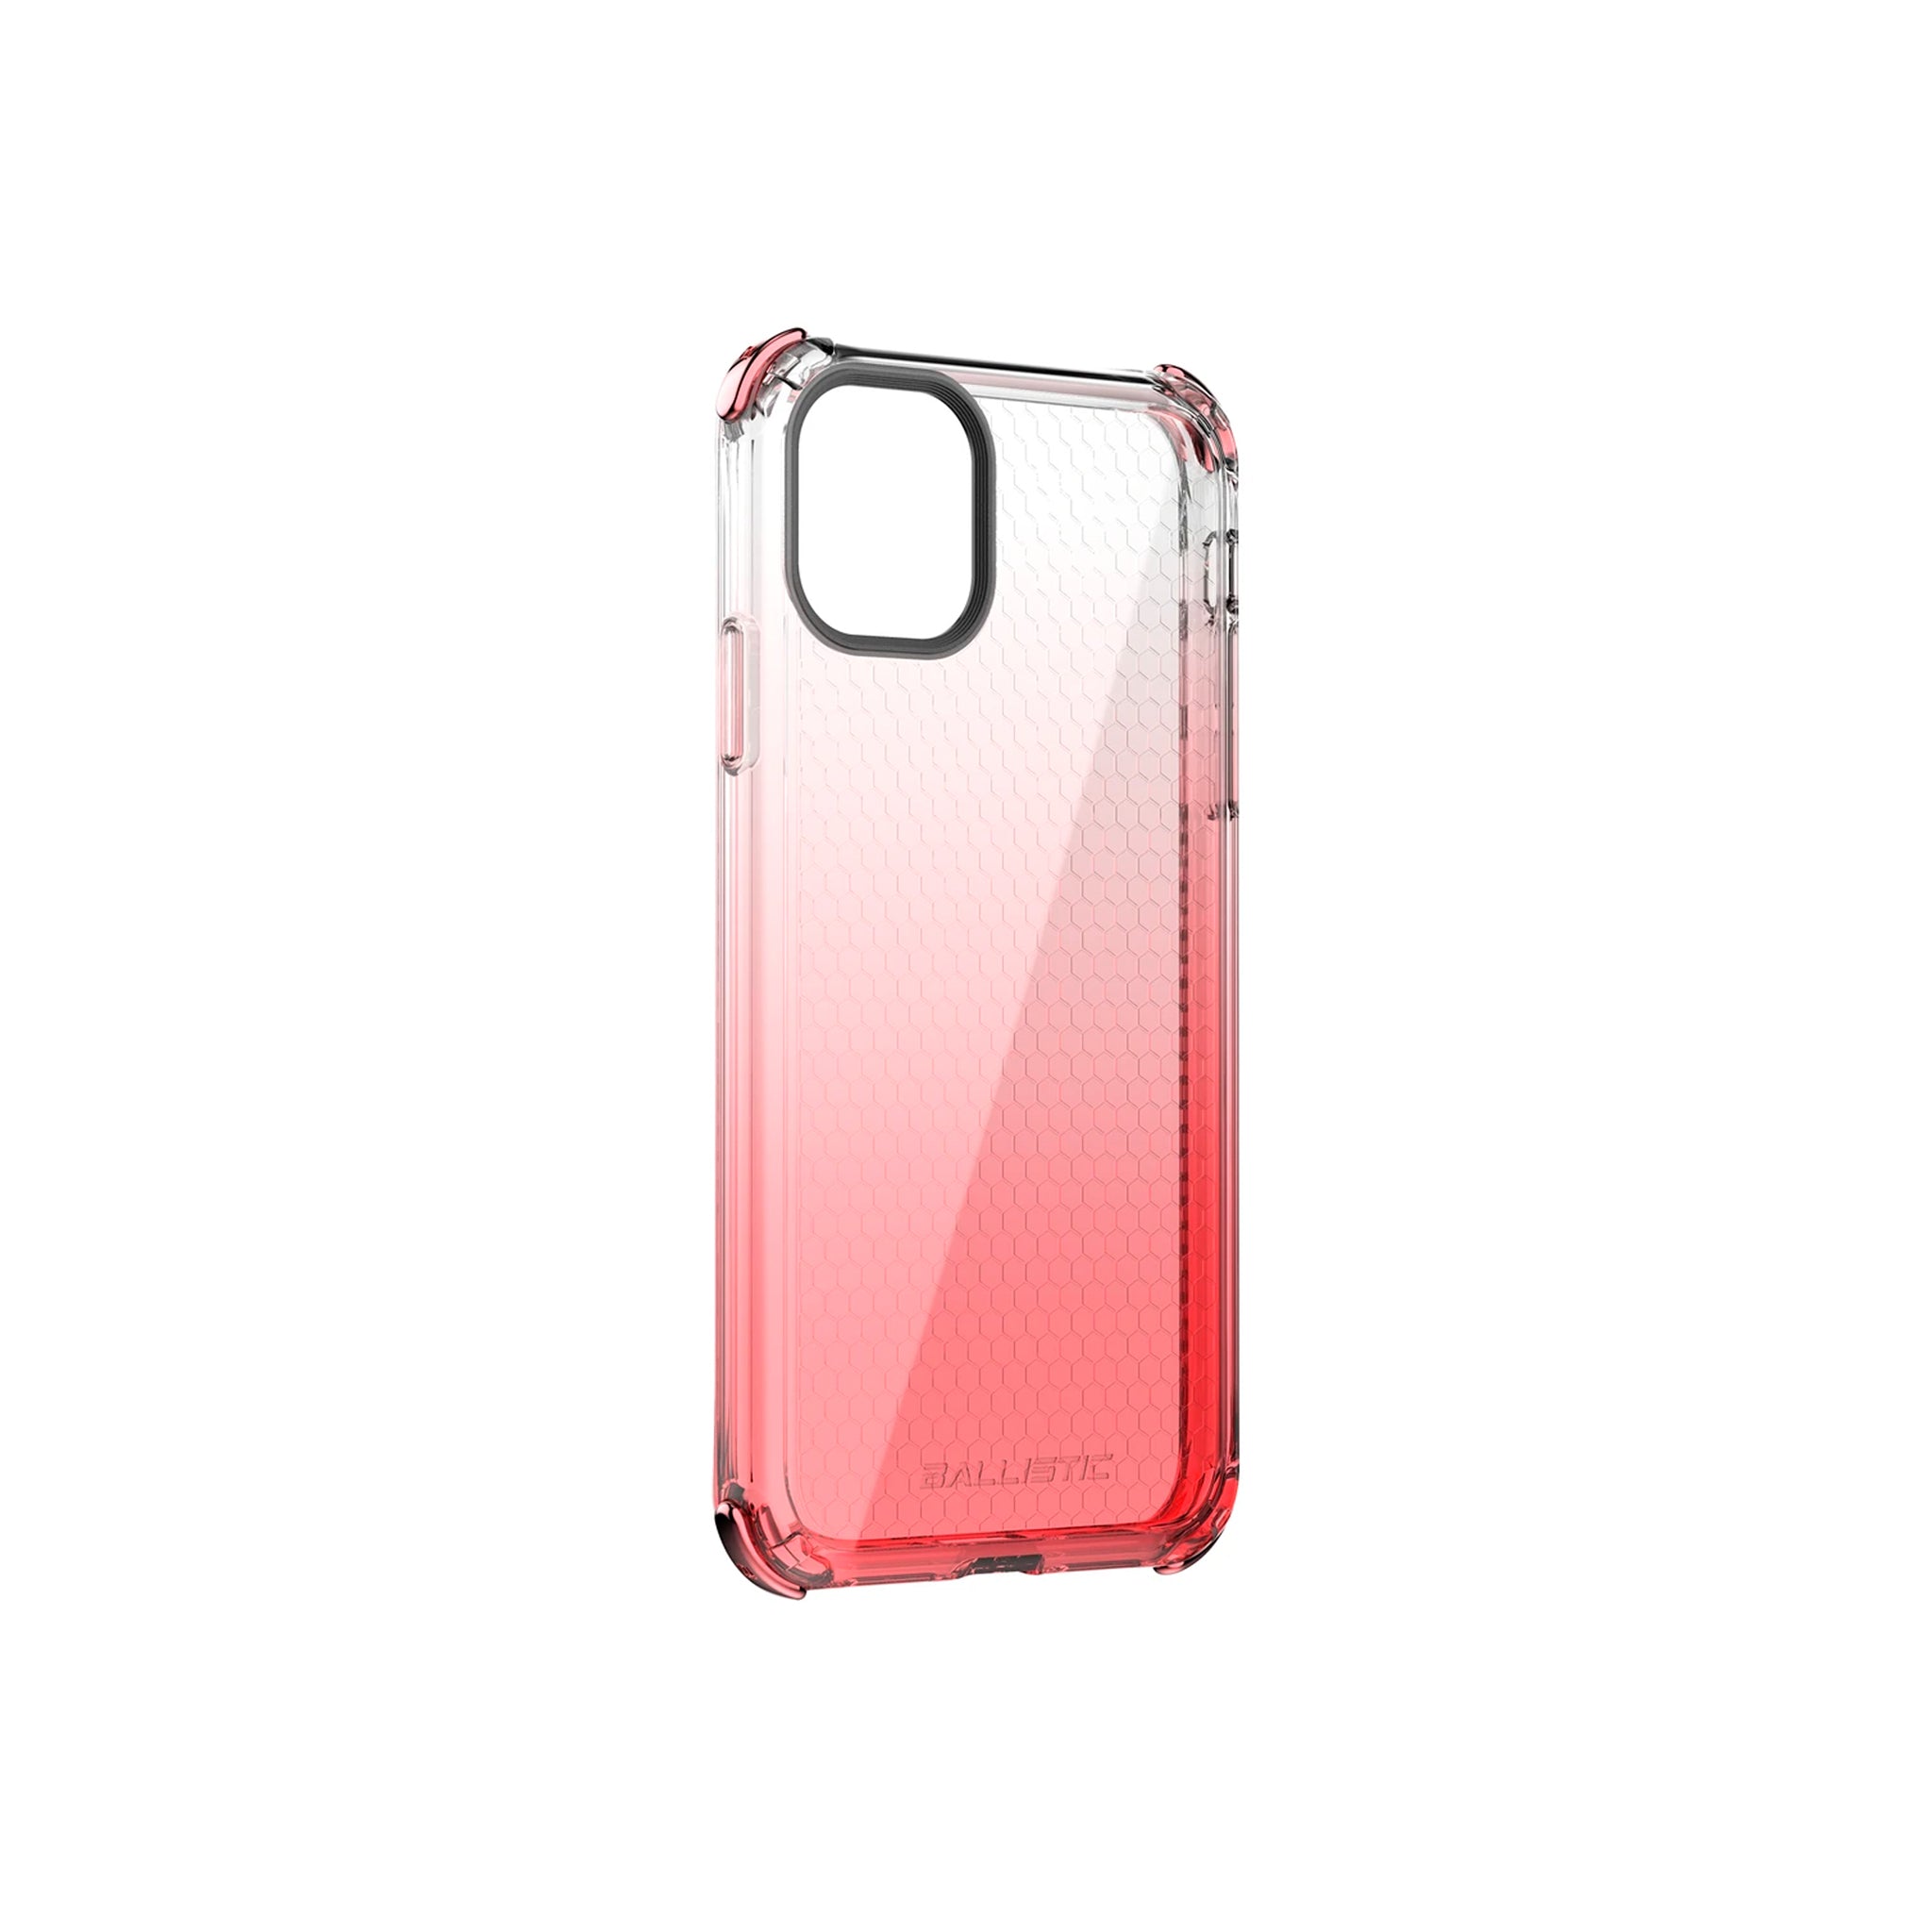 Ballistic - Jewel Spark Series For iPhone XR - Rose Gold